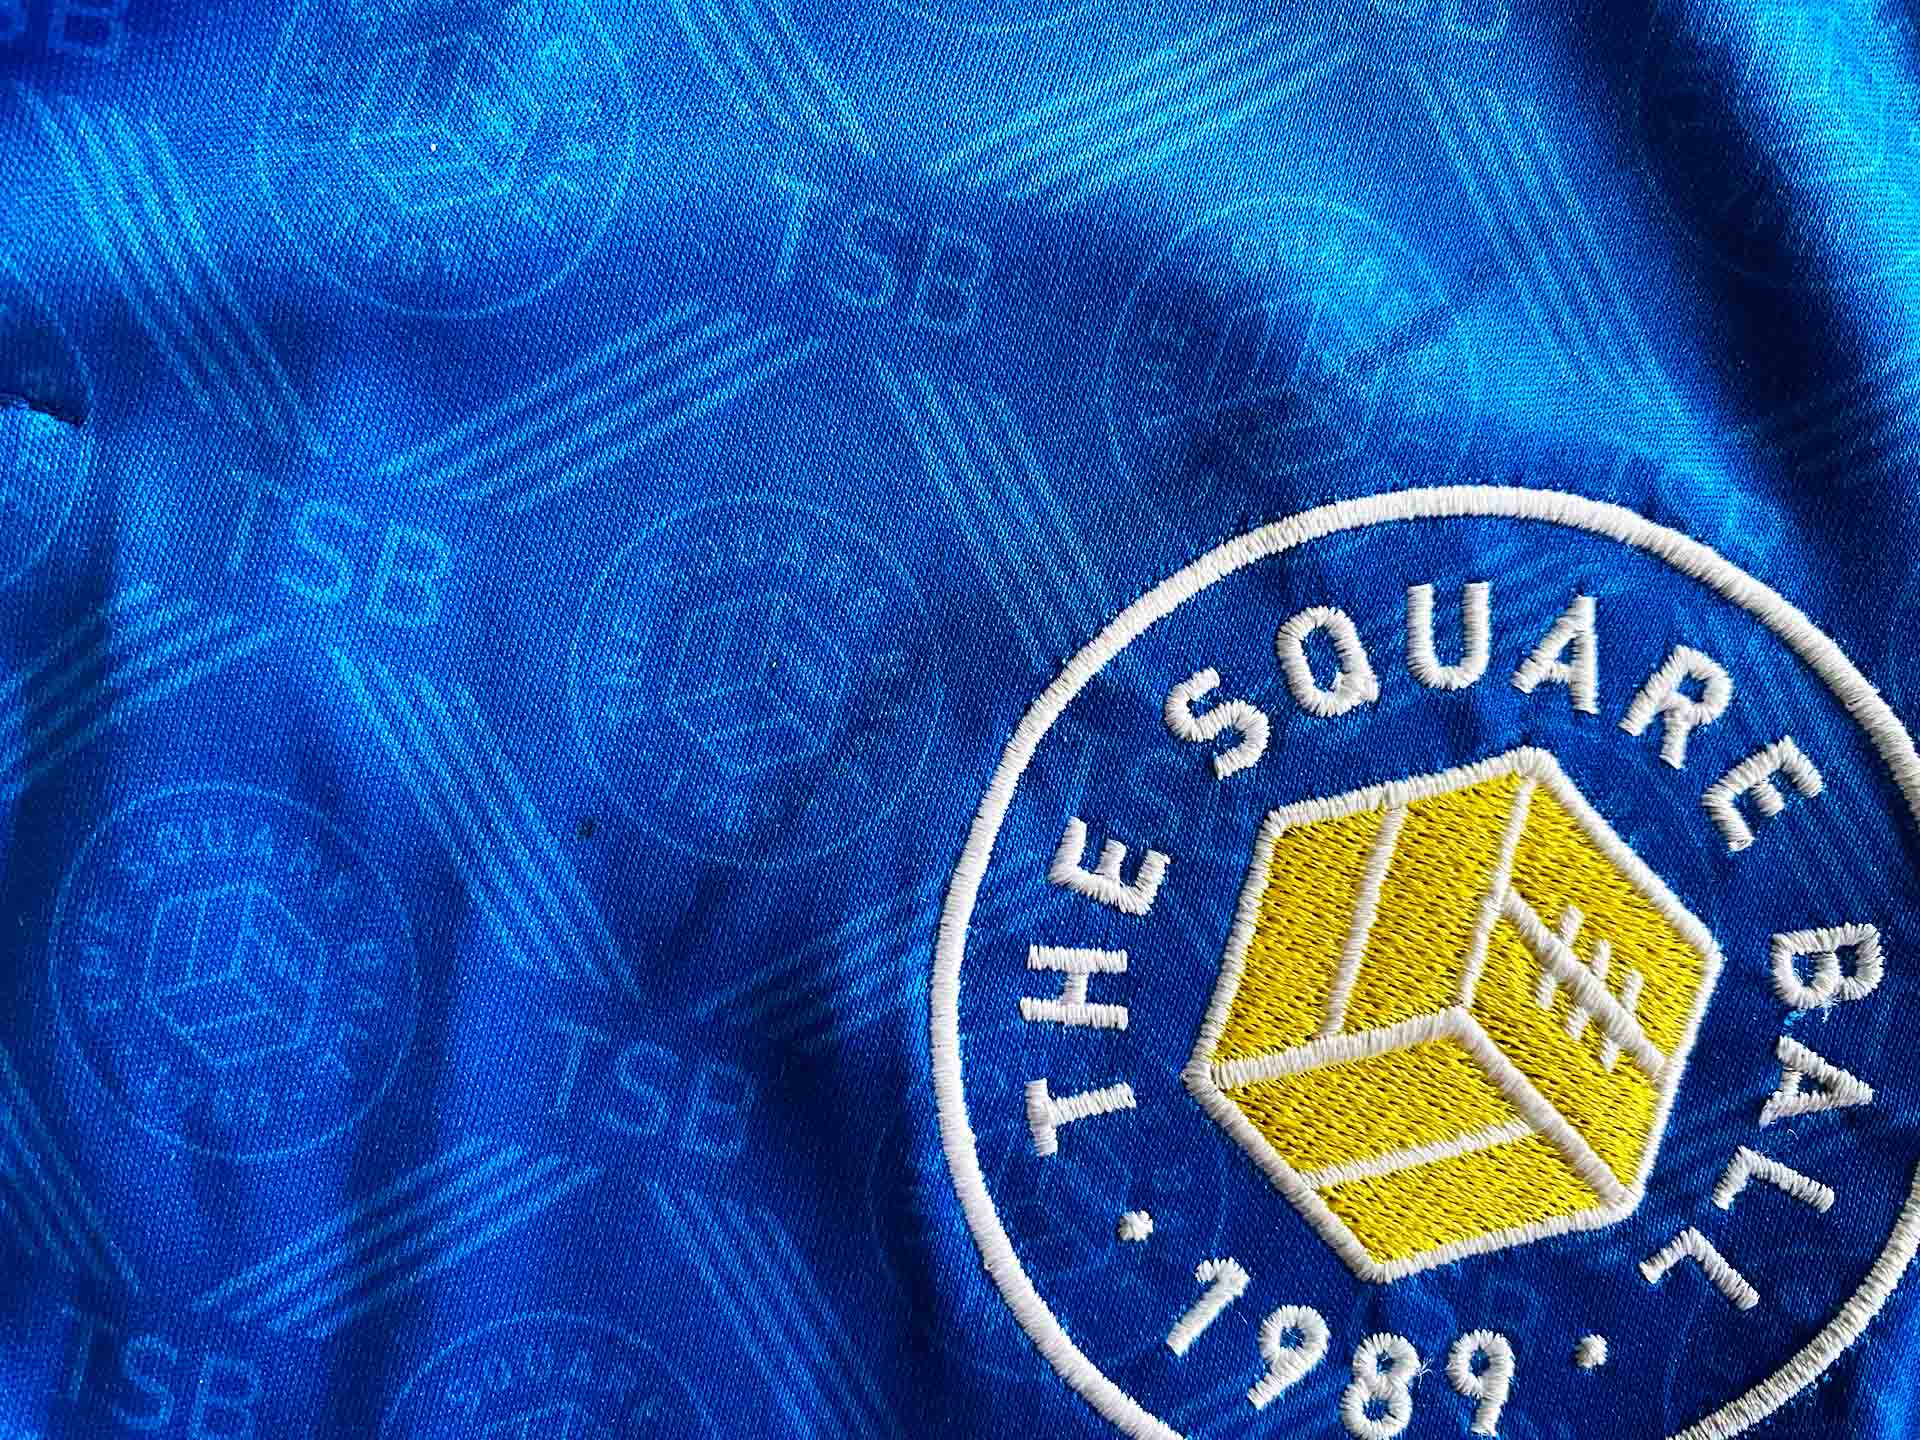 A badge sewn and sublimated onto a sports shirt.